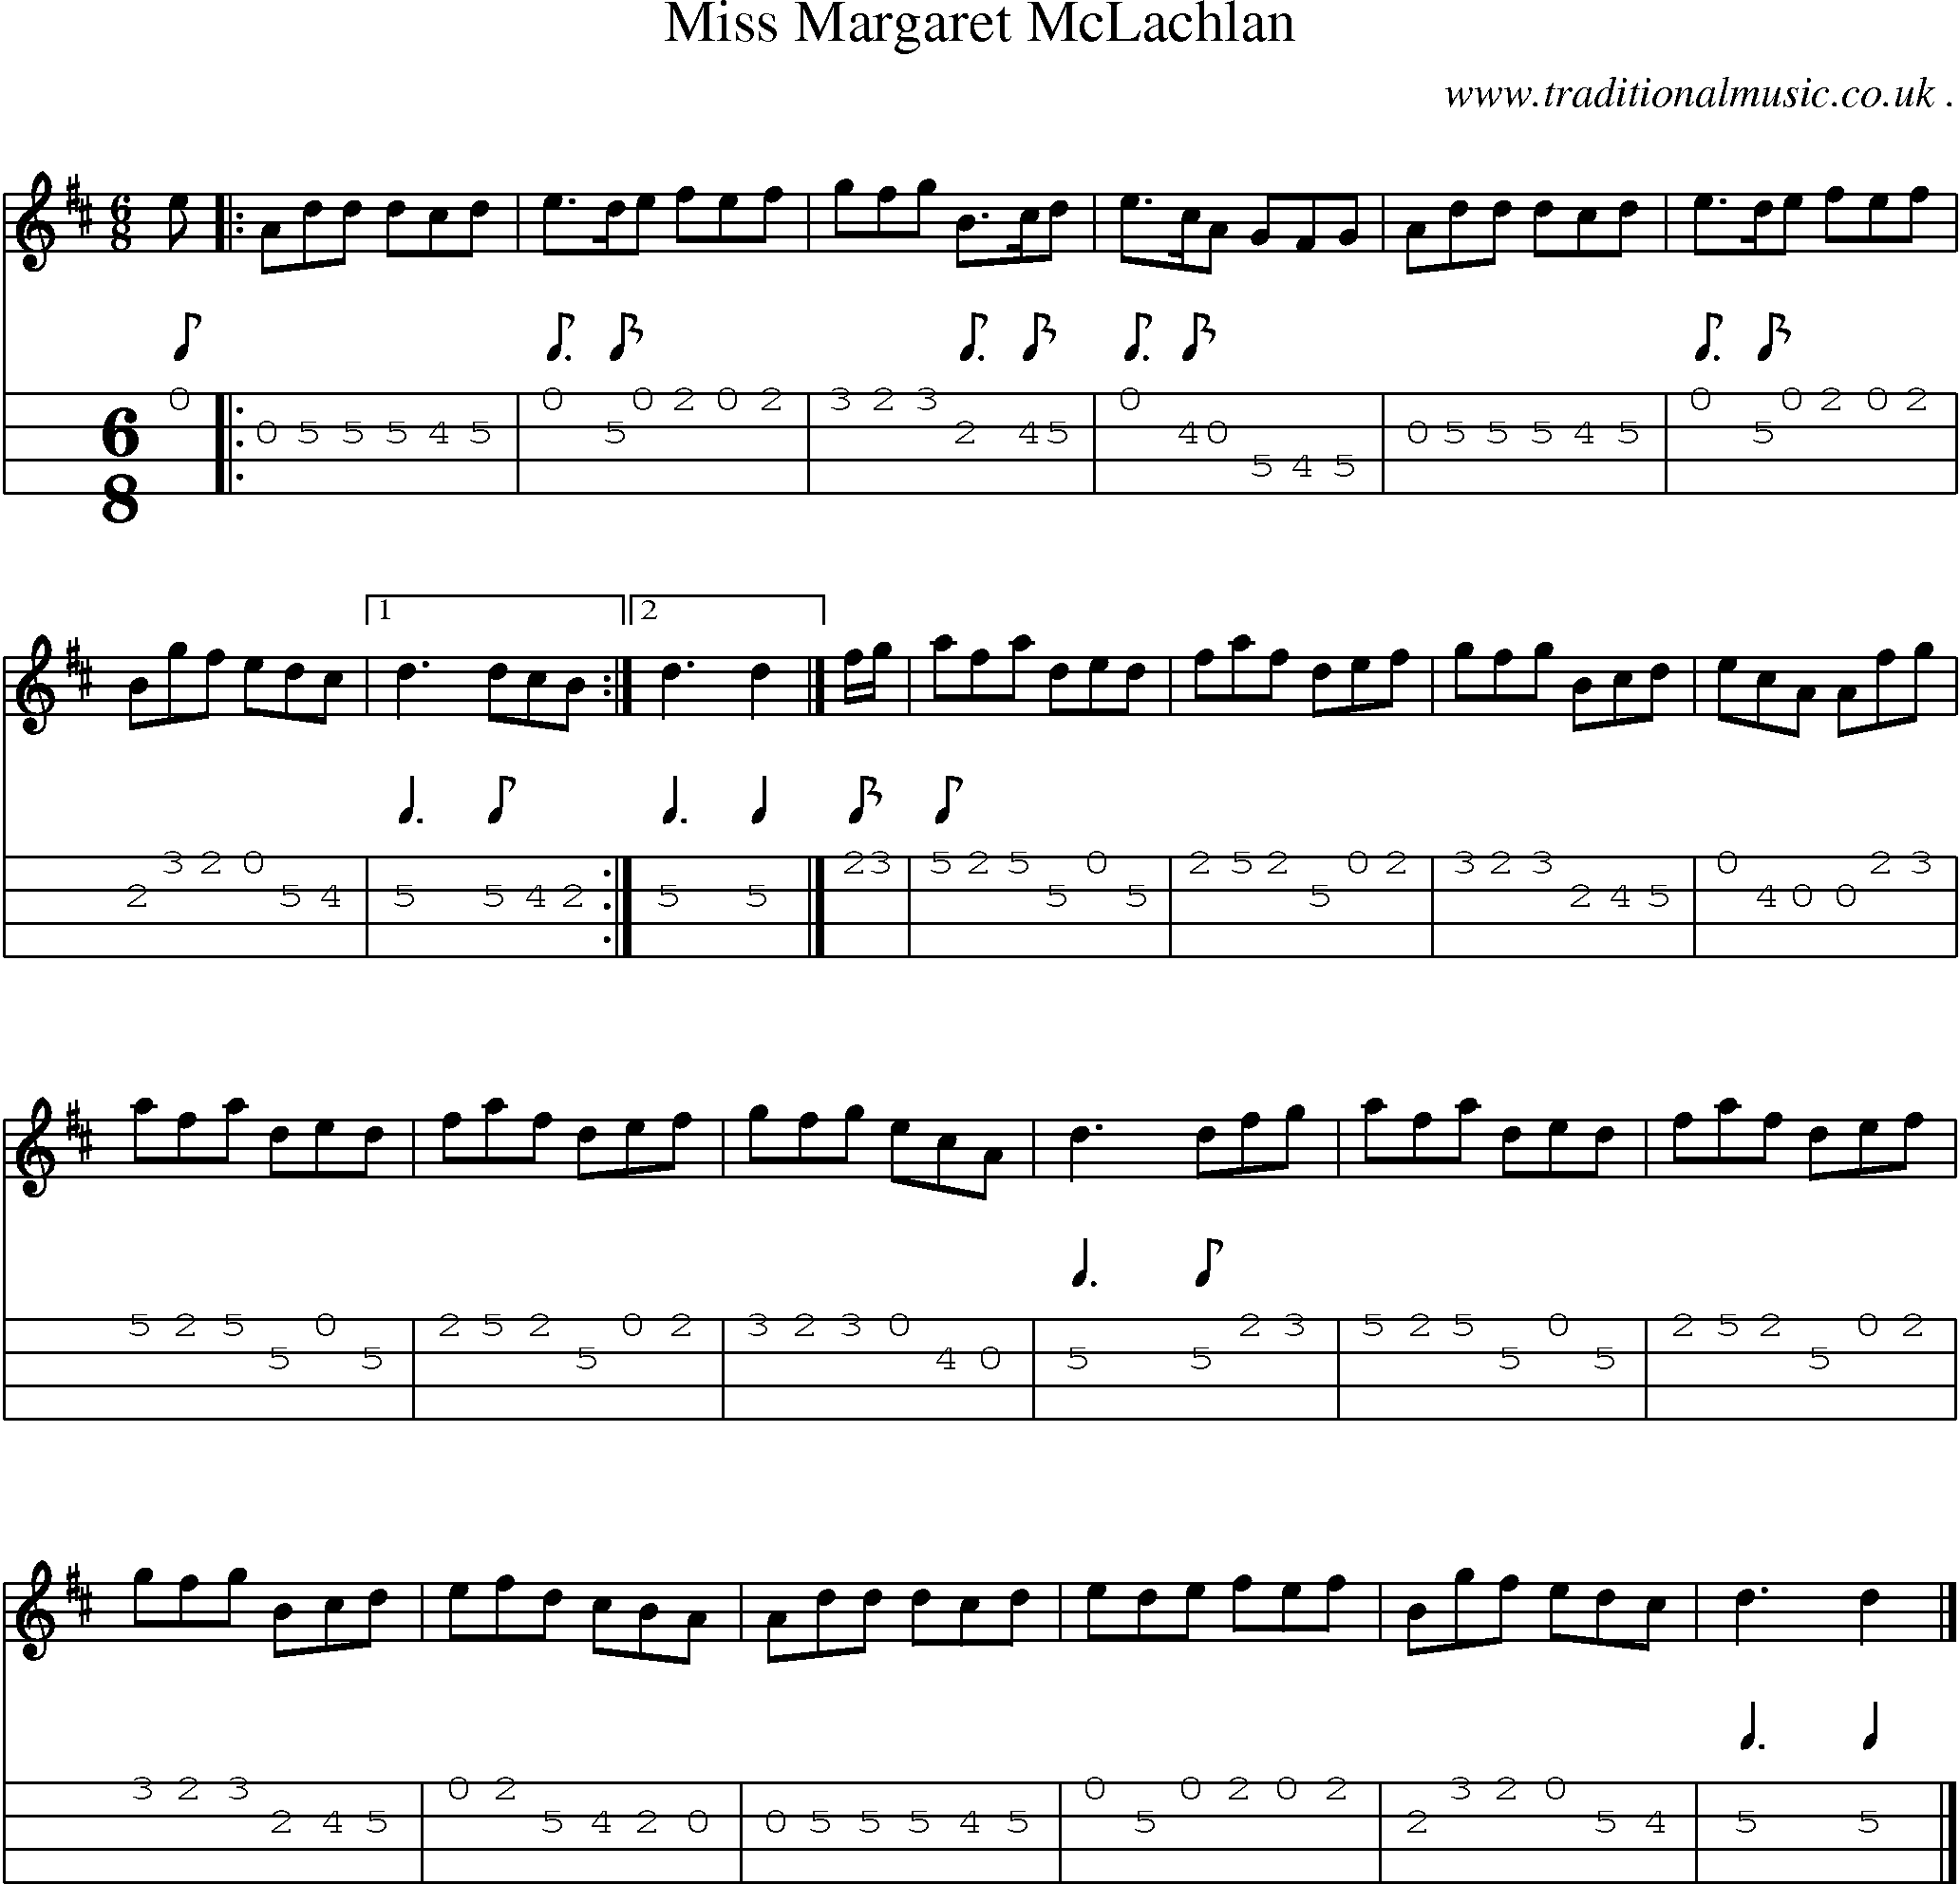 Sheet-music  score, Chords and Mandolin Tabs for Miss Margaret Mclachlan